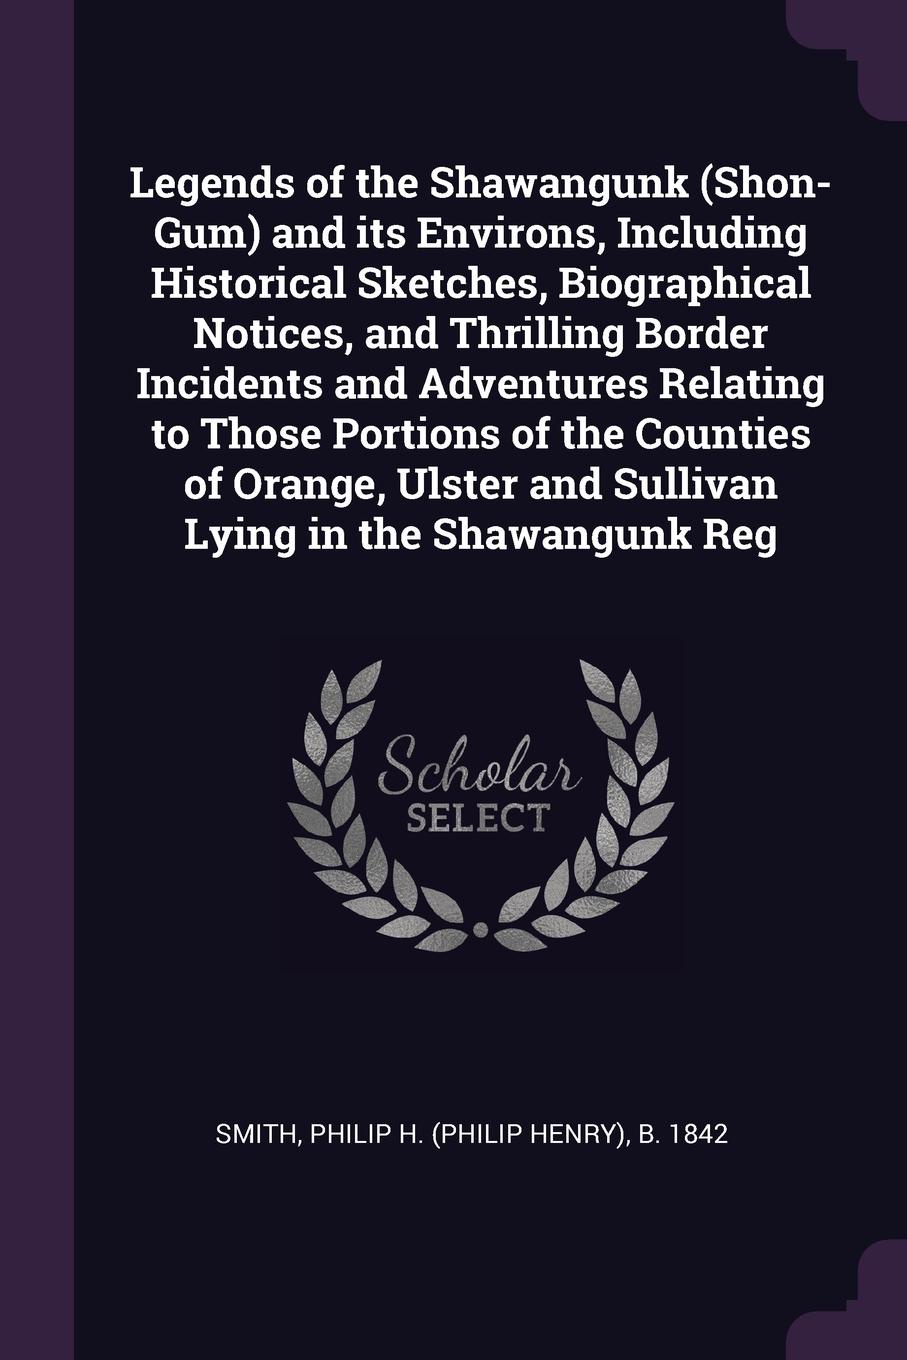 Legends of the Shawangunk (Shon-Gum) and its Environs, Including Historical Sketches, Biographical Notices, and Thrilling Border Incidents and Adventures Relating to Those Portions of the Counties of Orange, Ulster and Sullivan Lying in the Shawan...